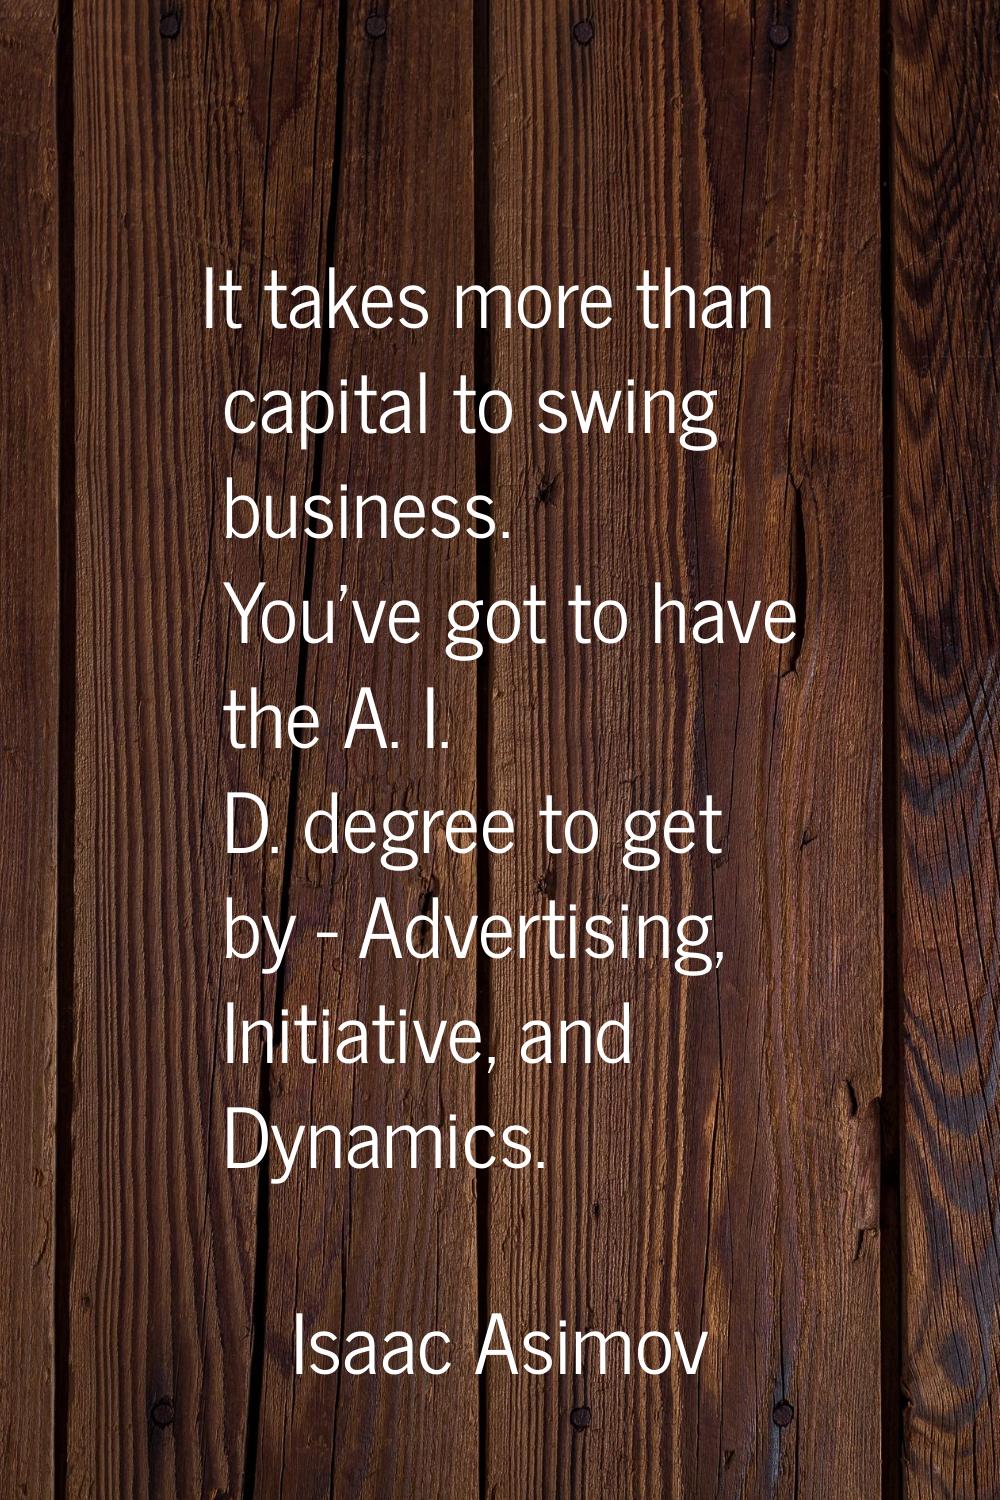 It takes more than capital to swing business. You've got to have the A. I. D. degree to get by - Ad